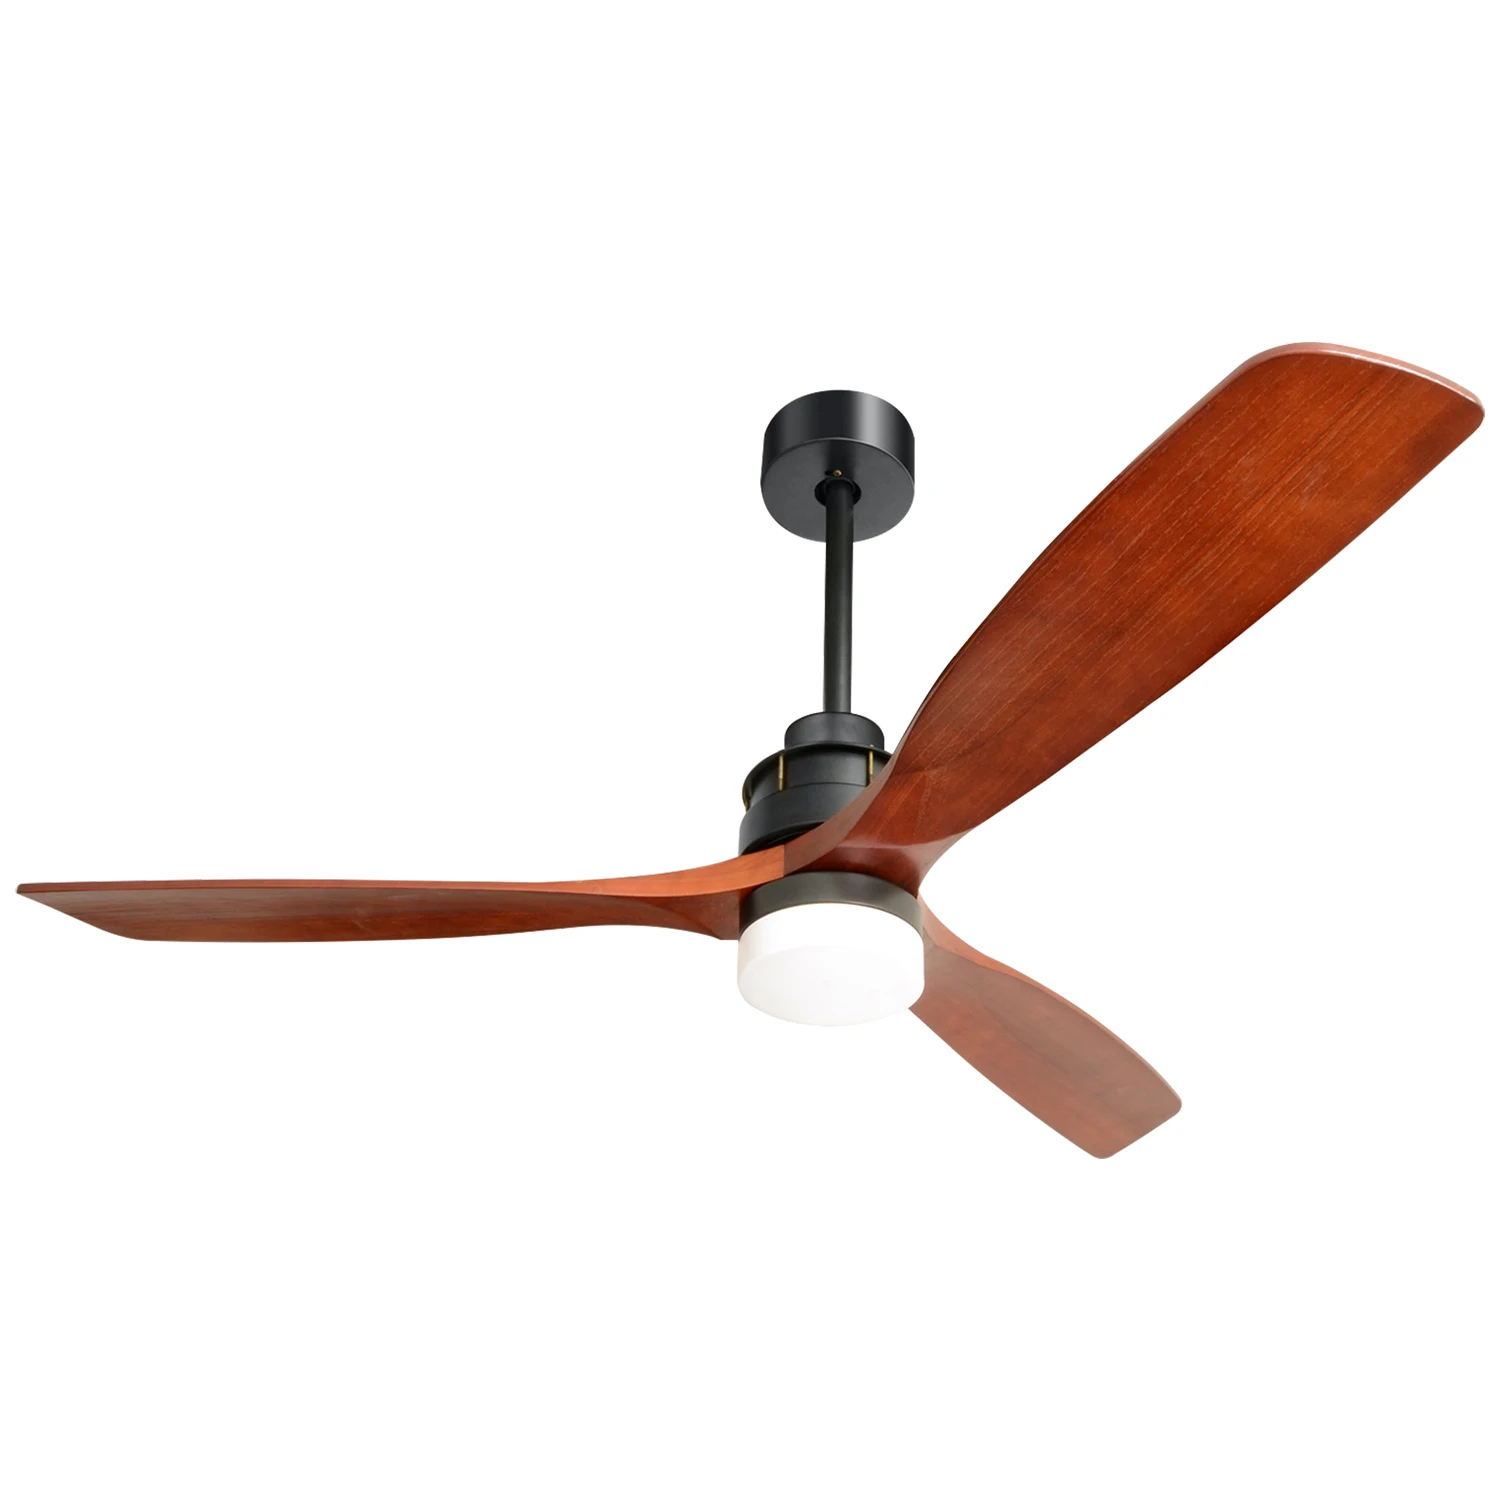 Best quality energy saving  motor natural wood blades modern decorative ceiling fans with led lights remote control